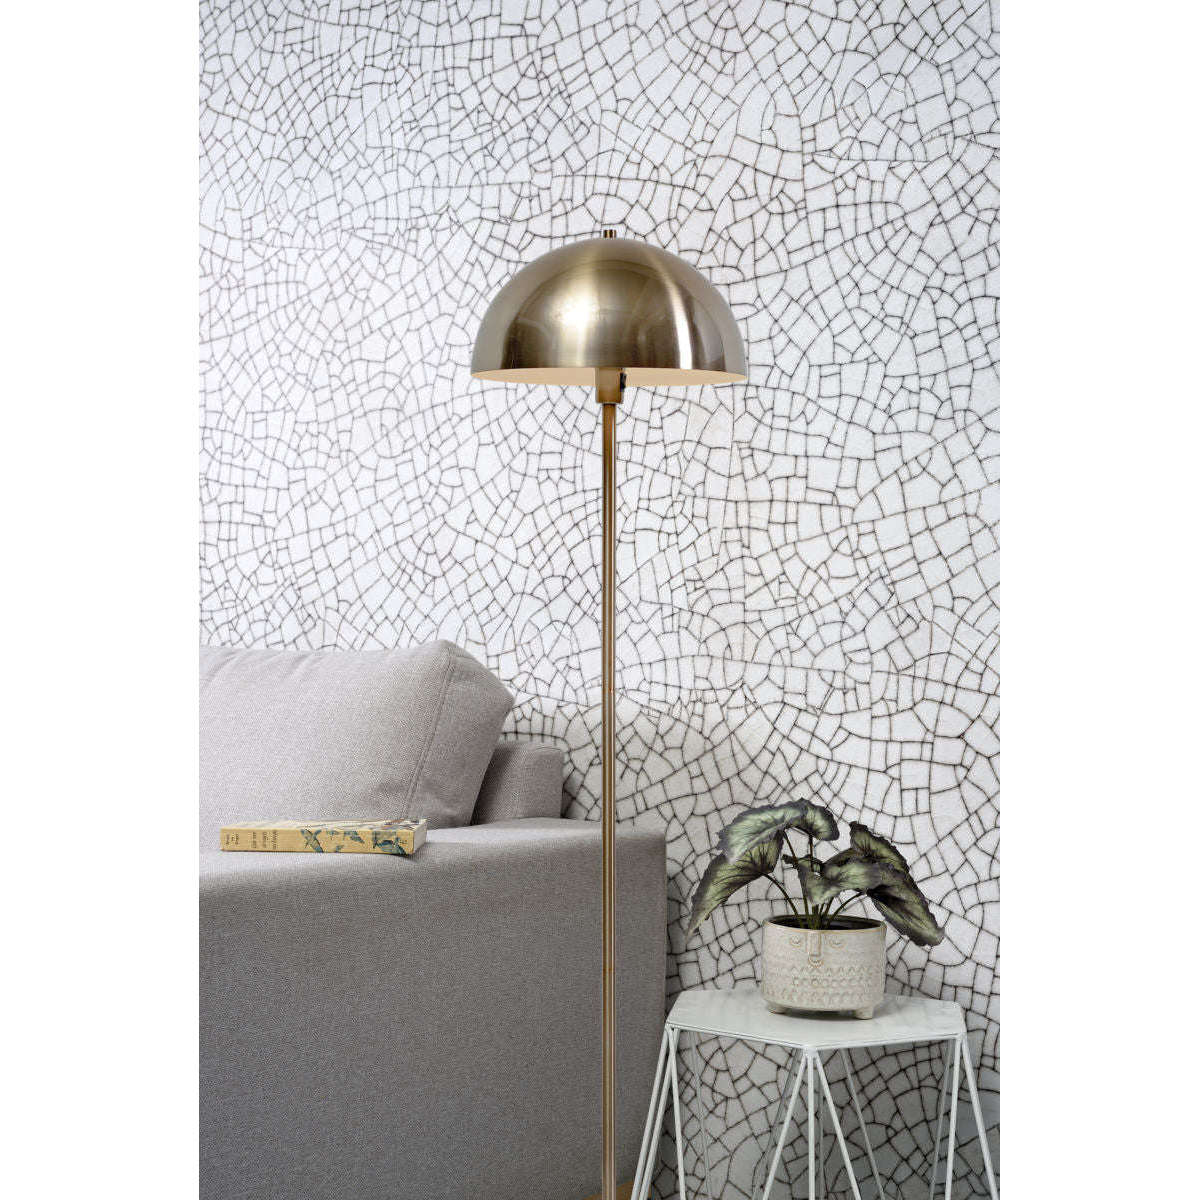 It's about RoMi Vloerlamp ijzer / marmer Toulouse wit / goud